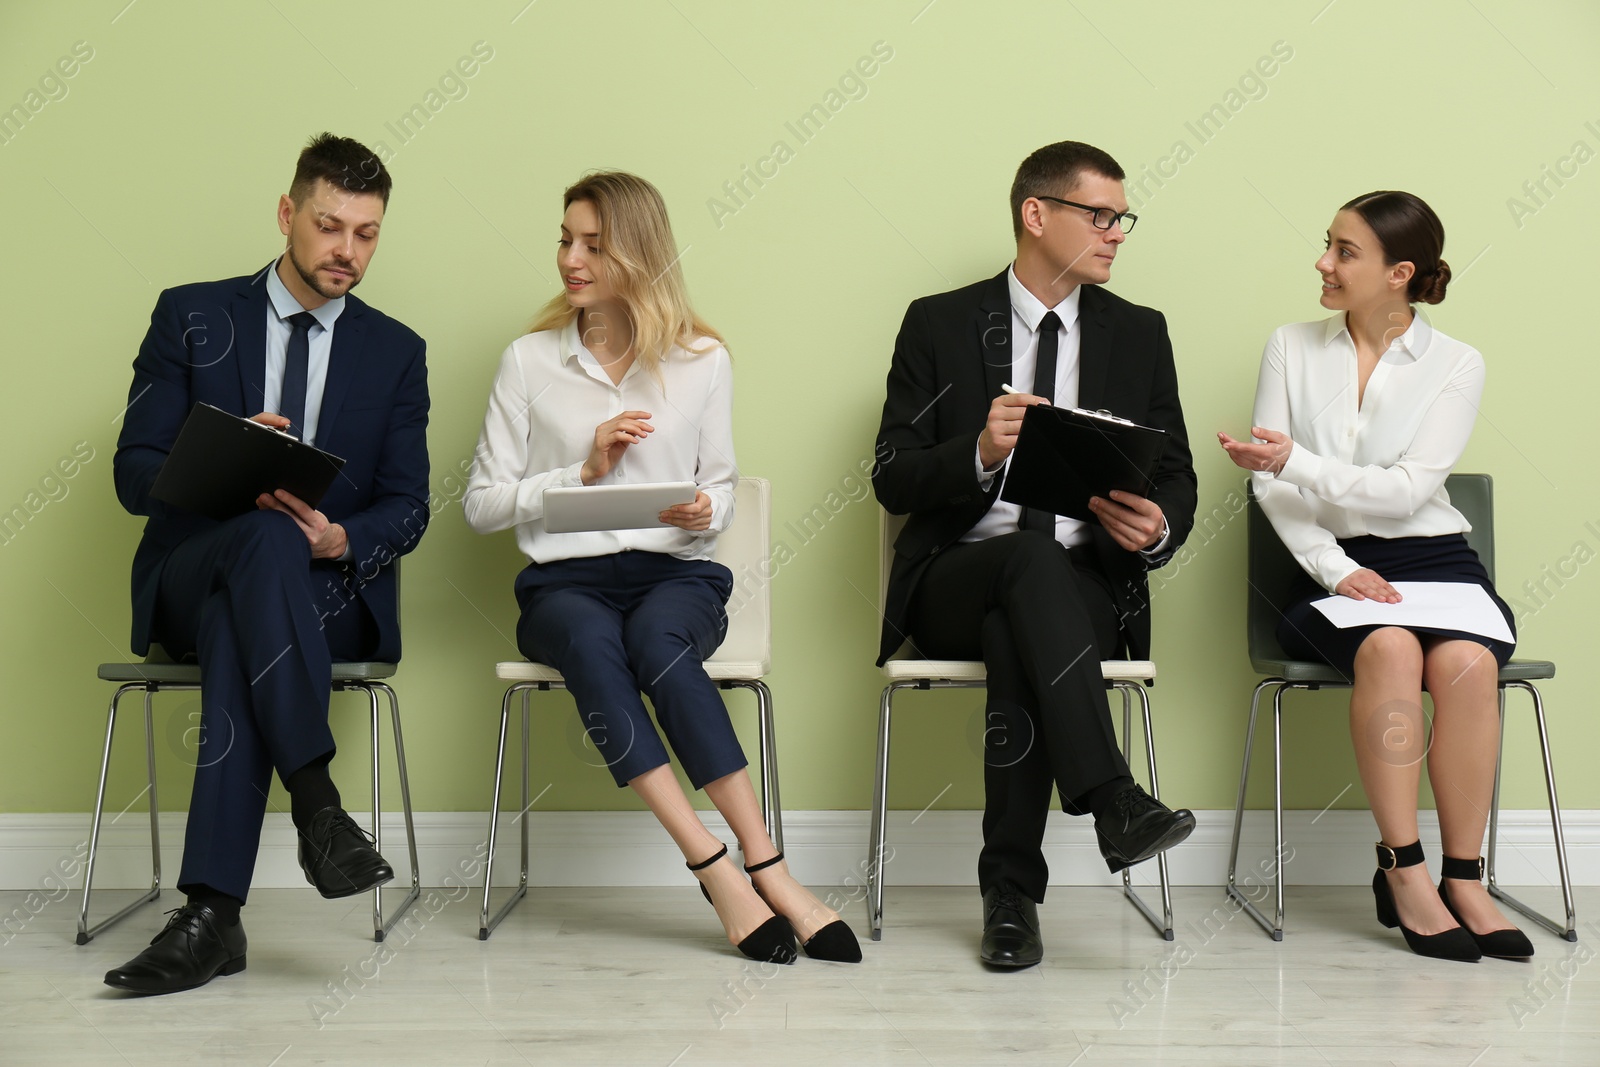 Photo of People waiting for job interview near light green wall indoors